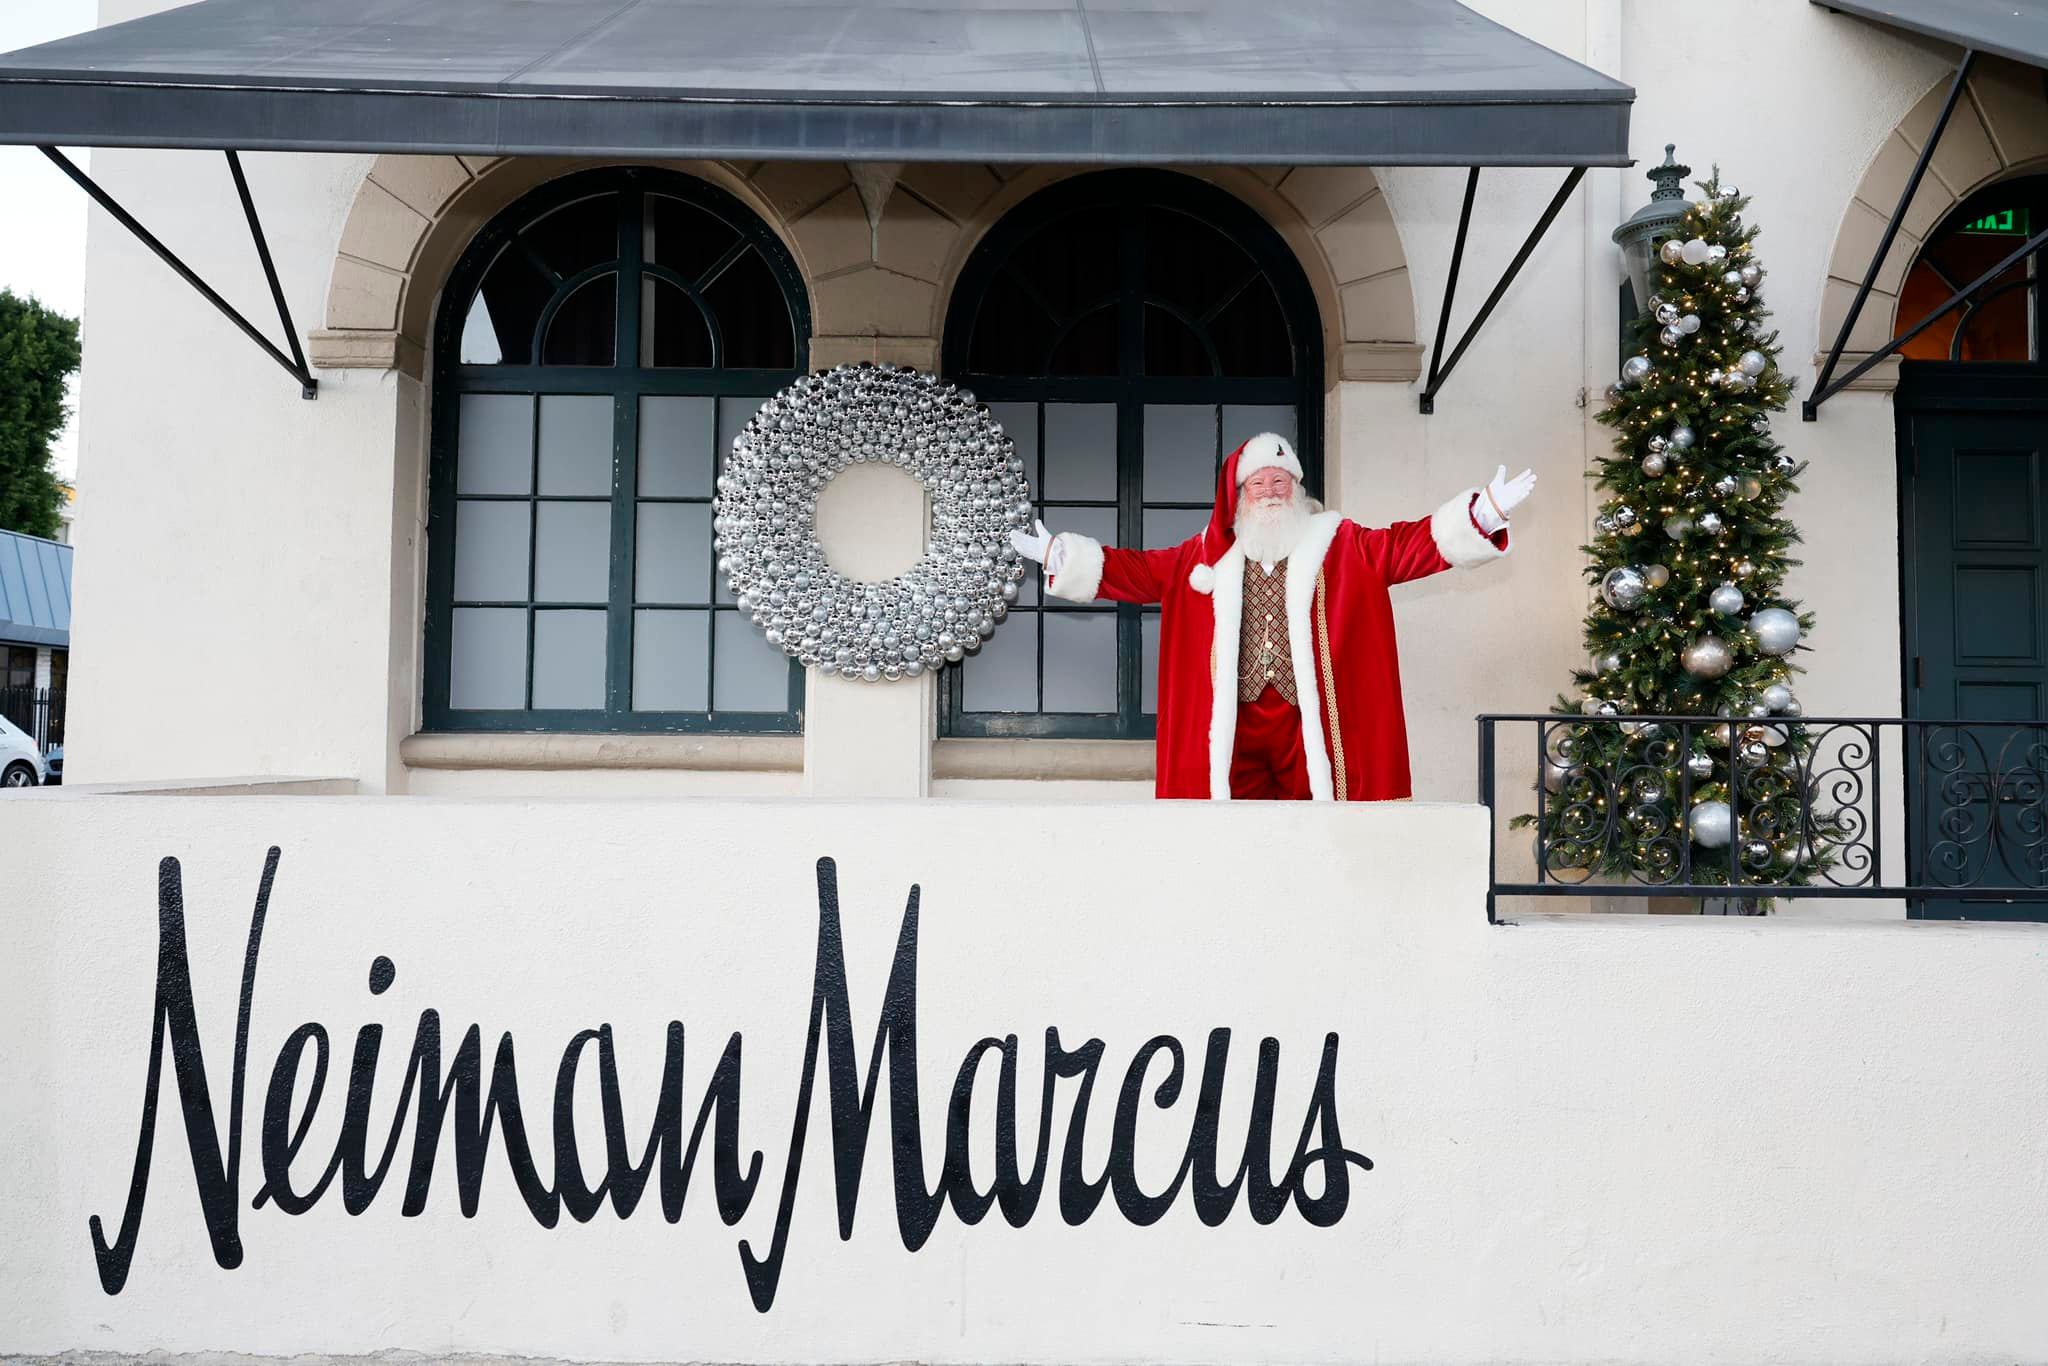 Neiman Marcus Group on Instagram: This Holiday season, we're